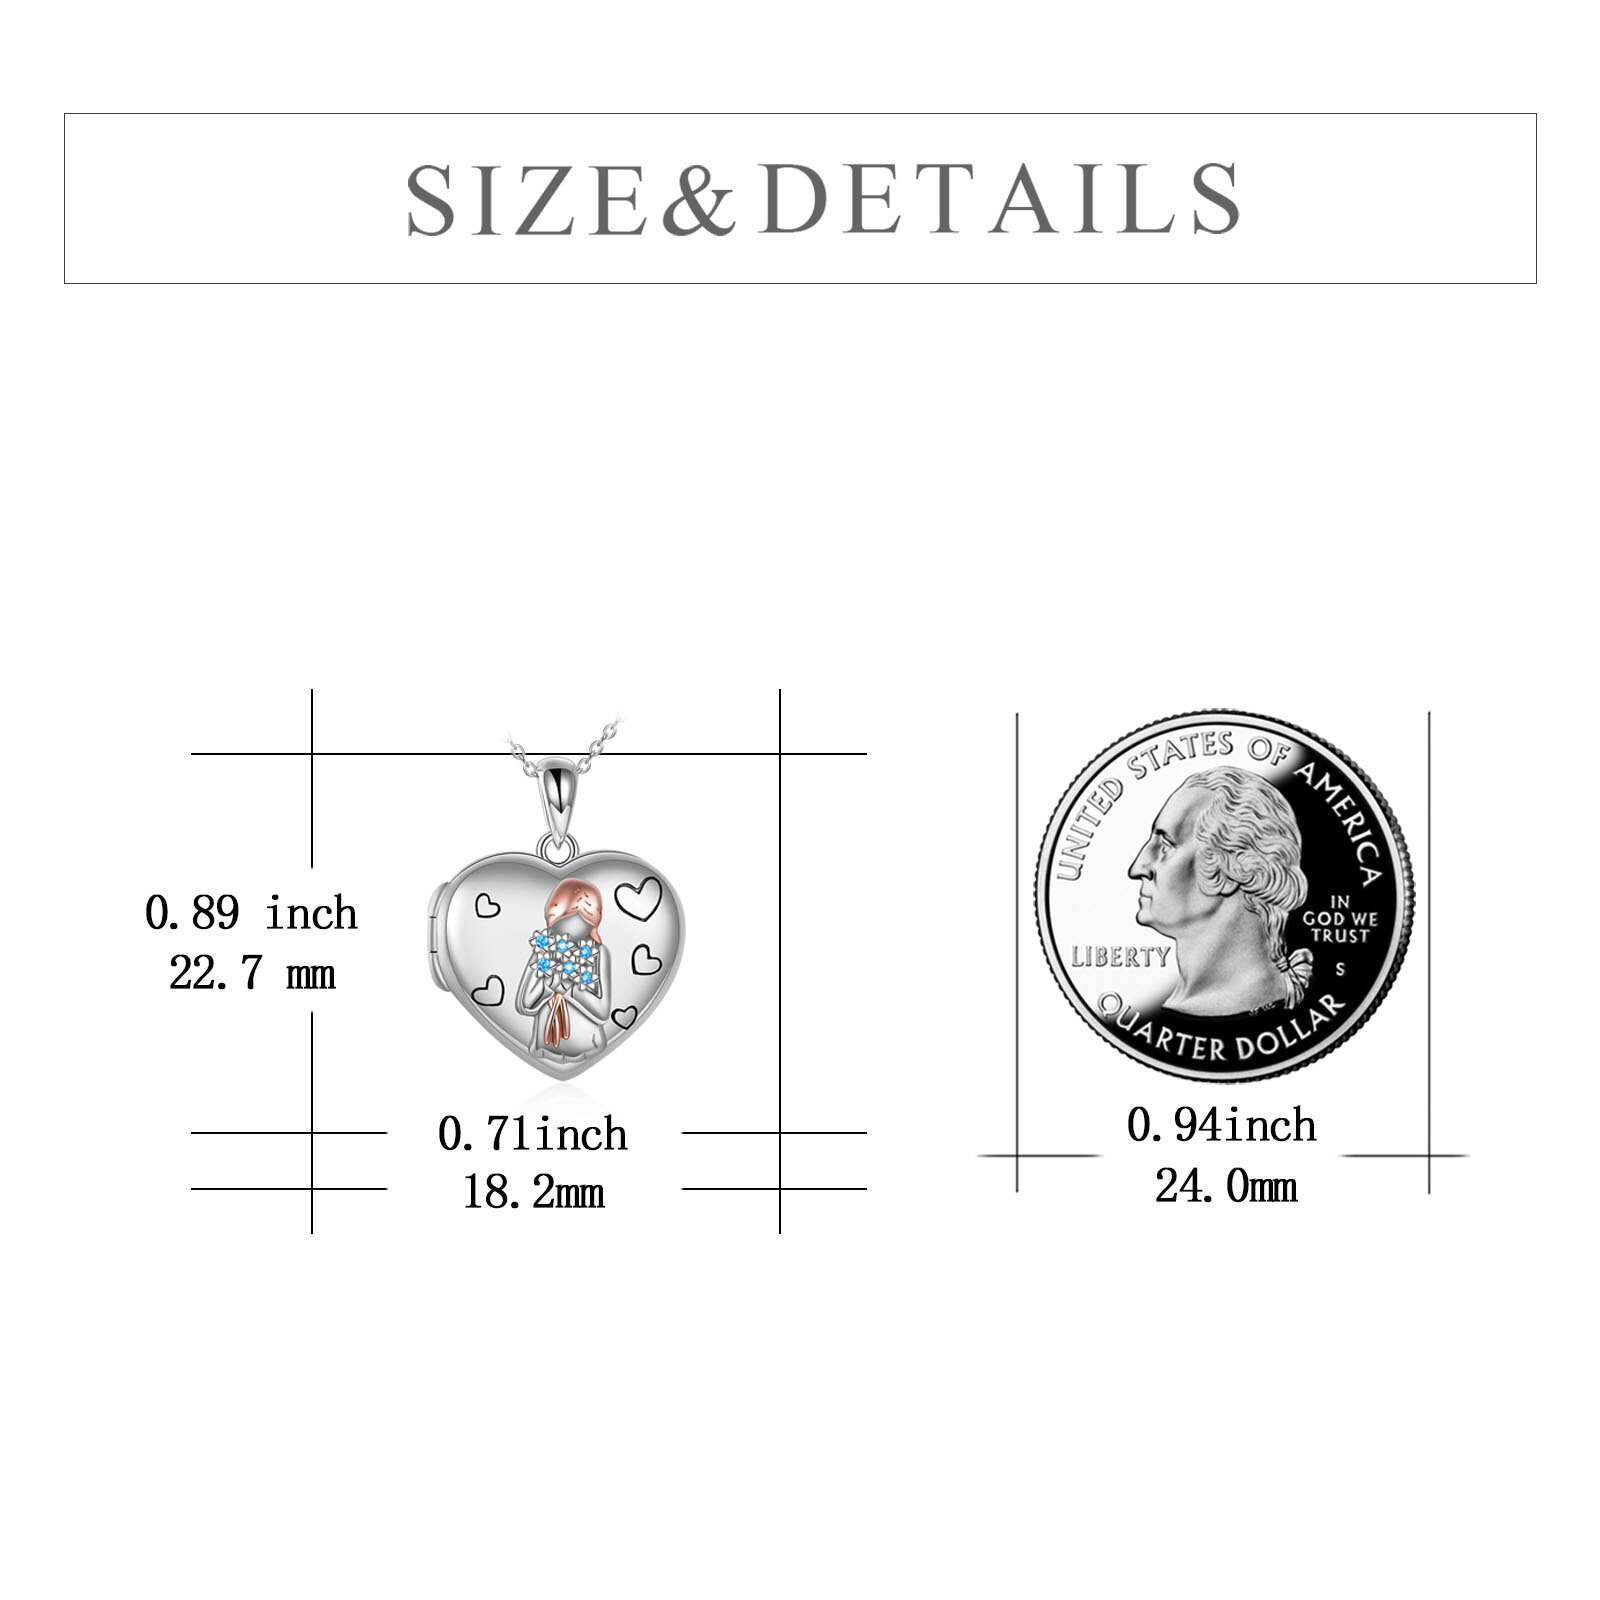 16301157160996abd06 - Sterling Silver Forget-me-not Heart Locket That Holds Pictures Memory Locket Necklace